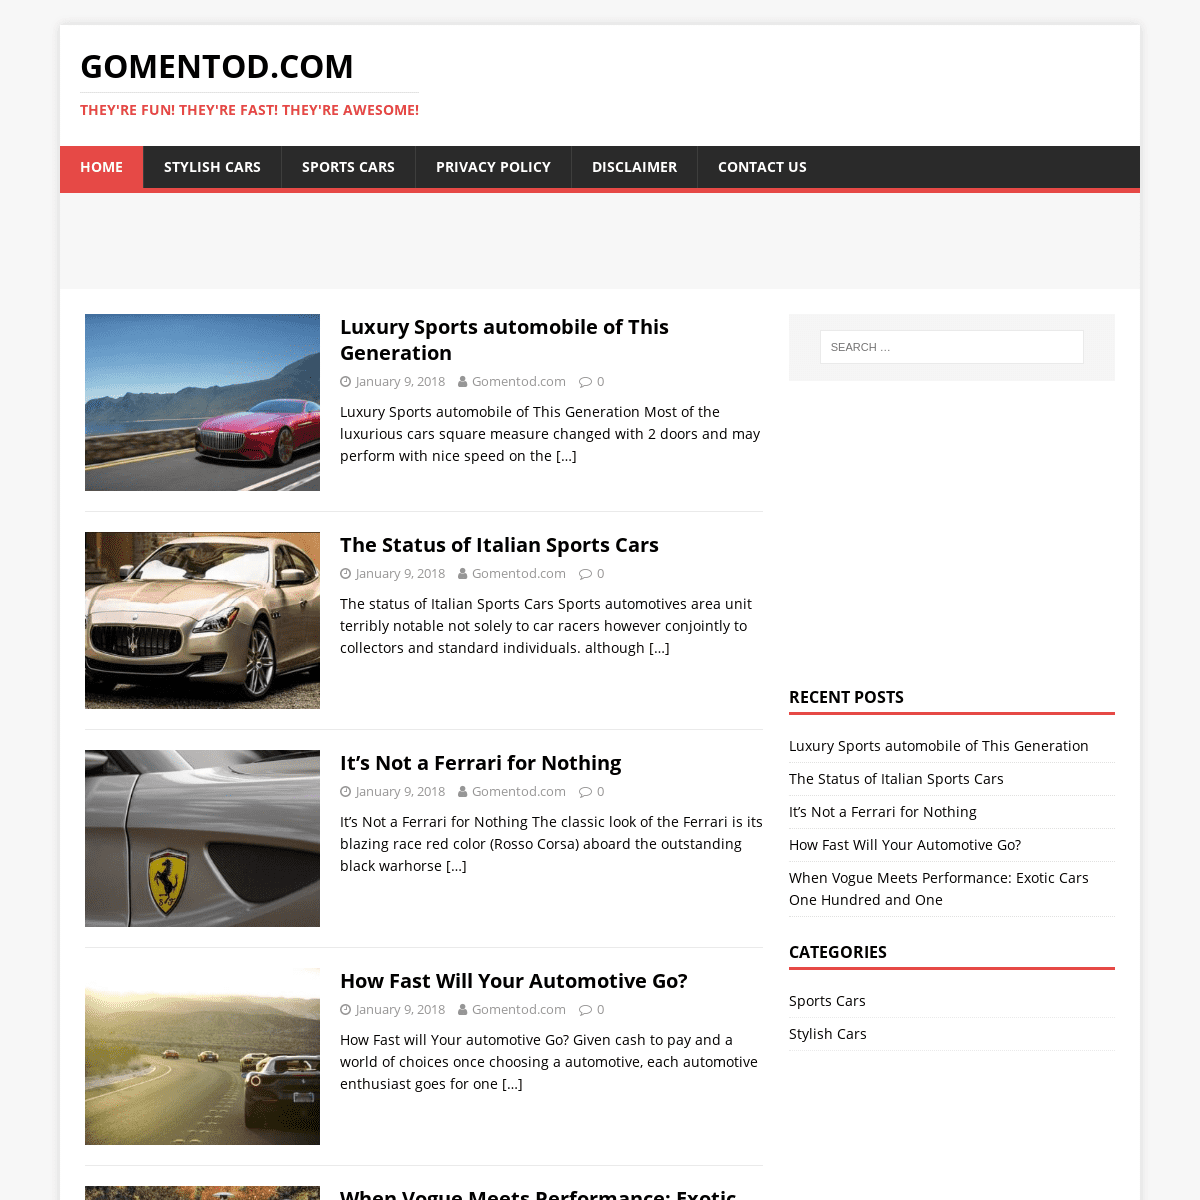 GOMENTOD.COM – They're Fun! They're Fast! They're Awesome!